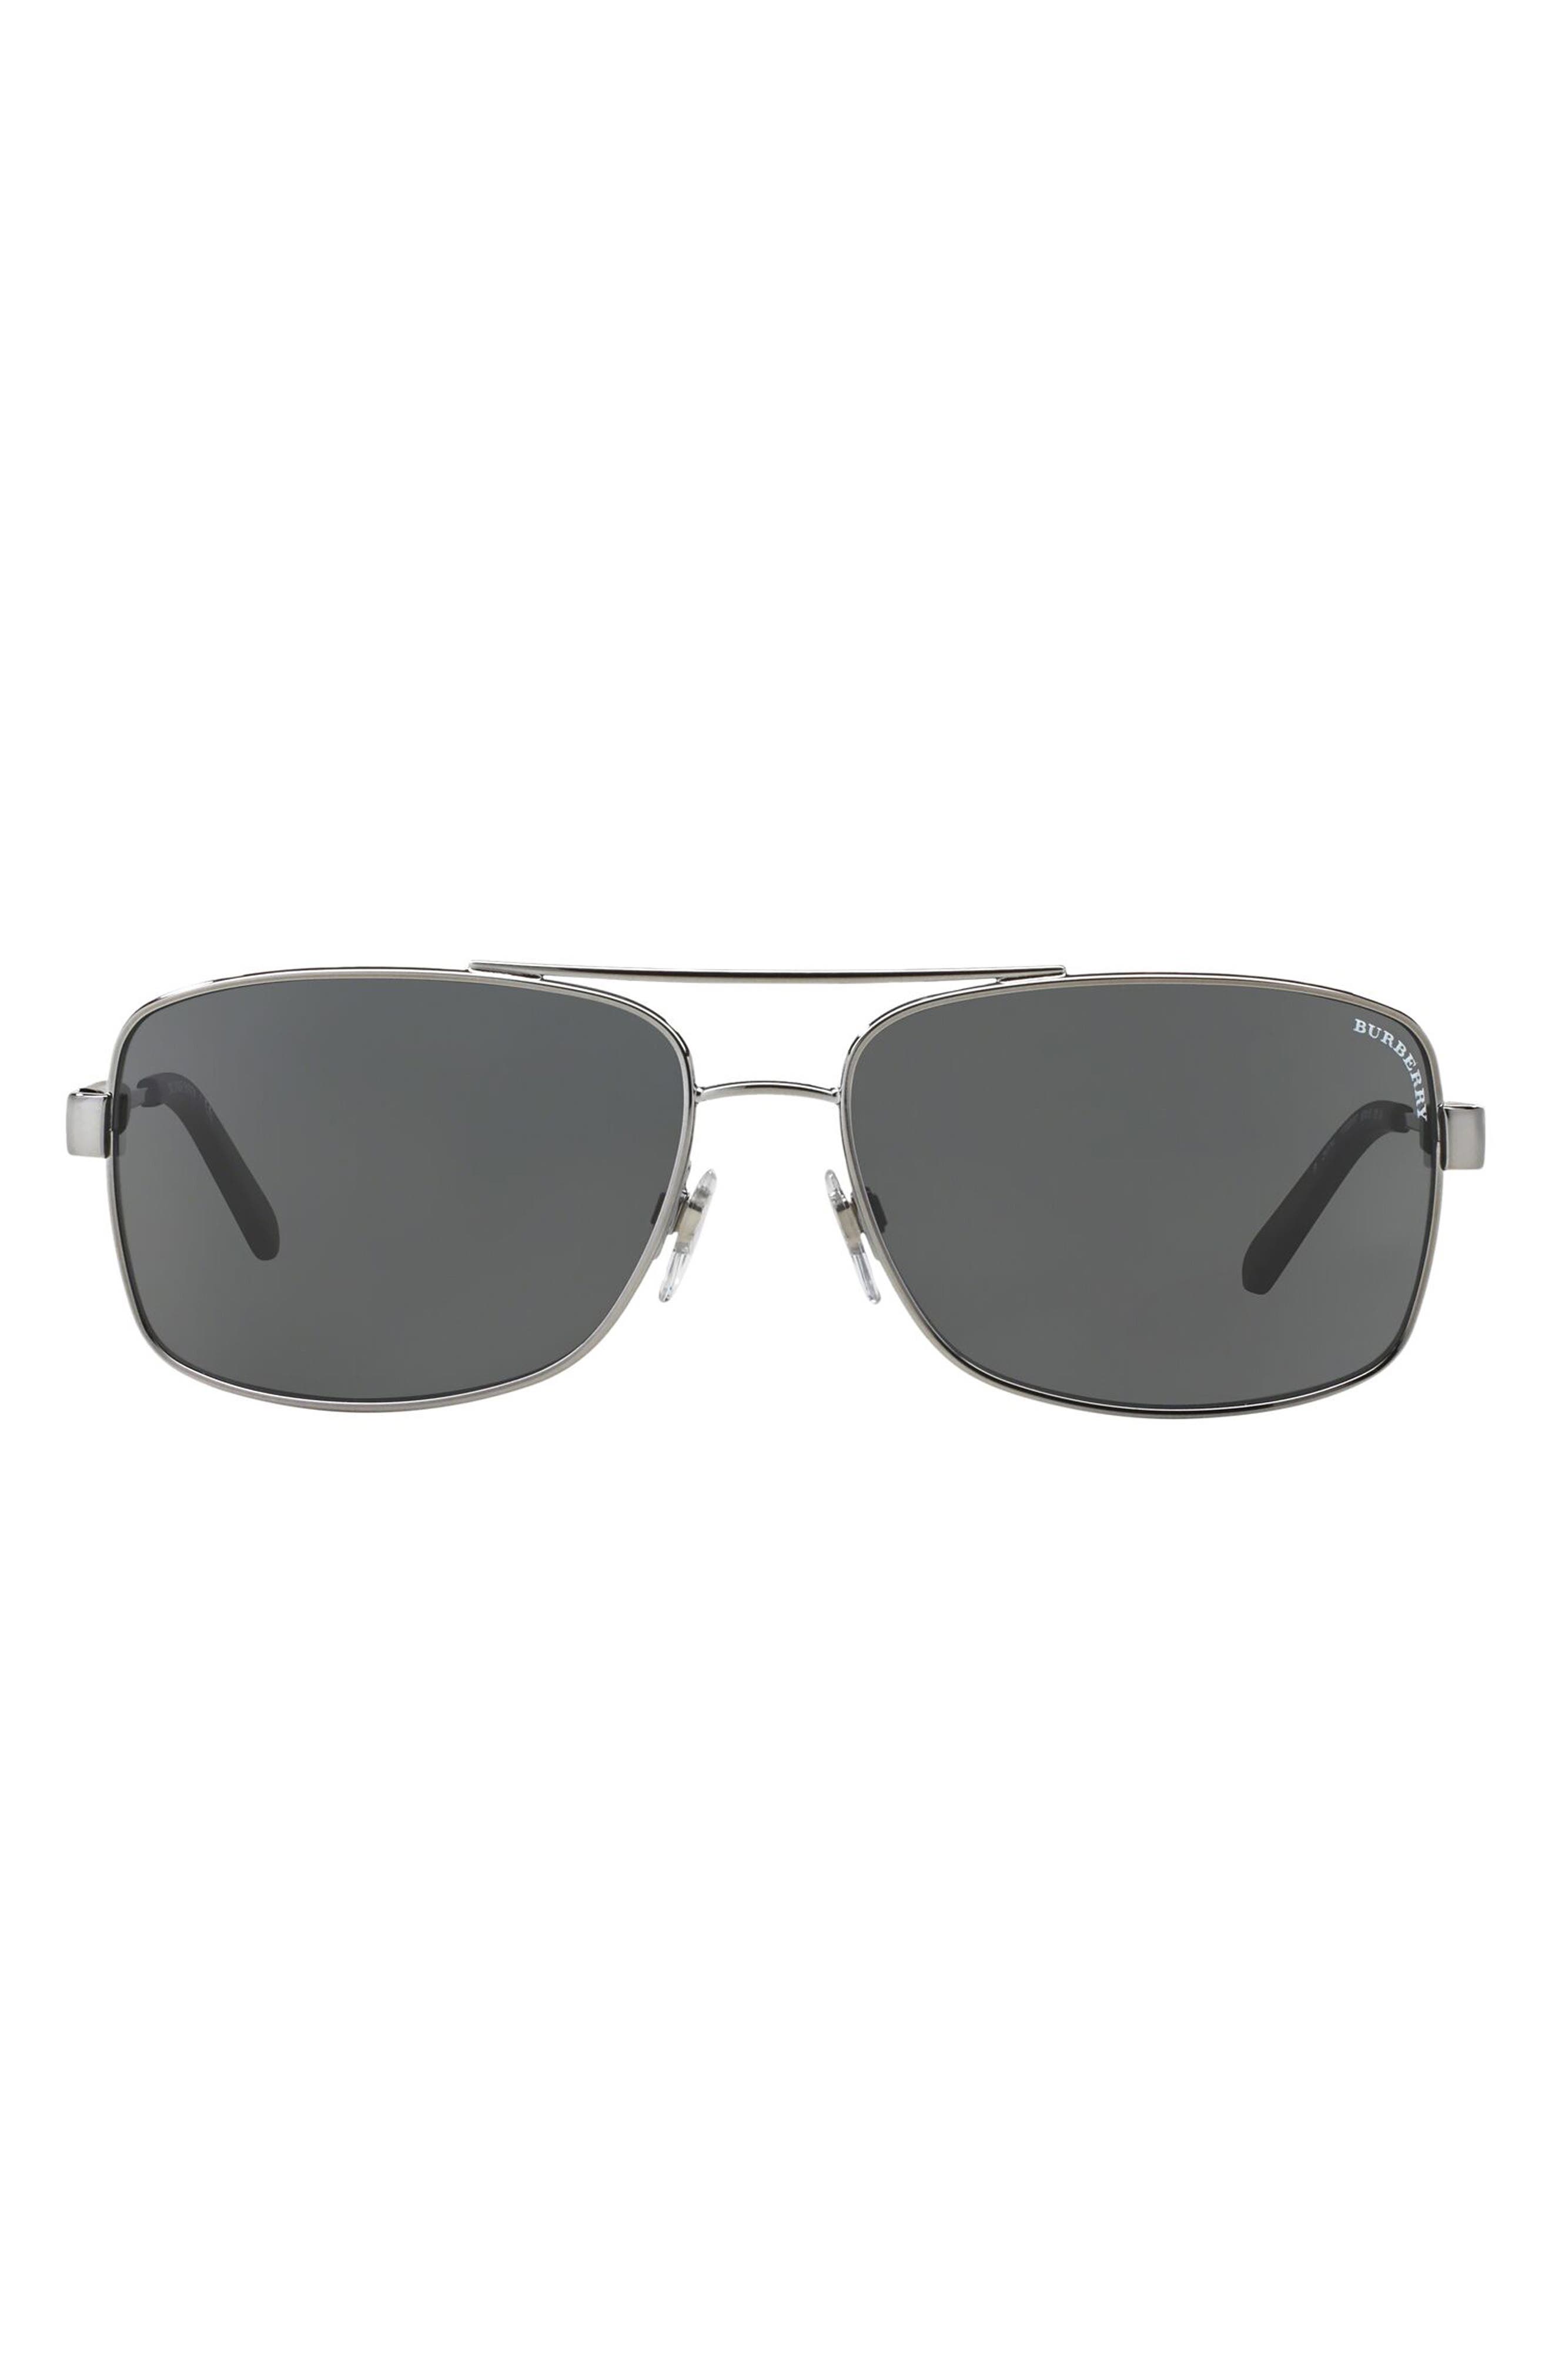 Burberry 63mm Oversize Rectangle Sunglasses in Gunmetal /Grey at Nordstrom